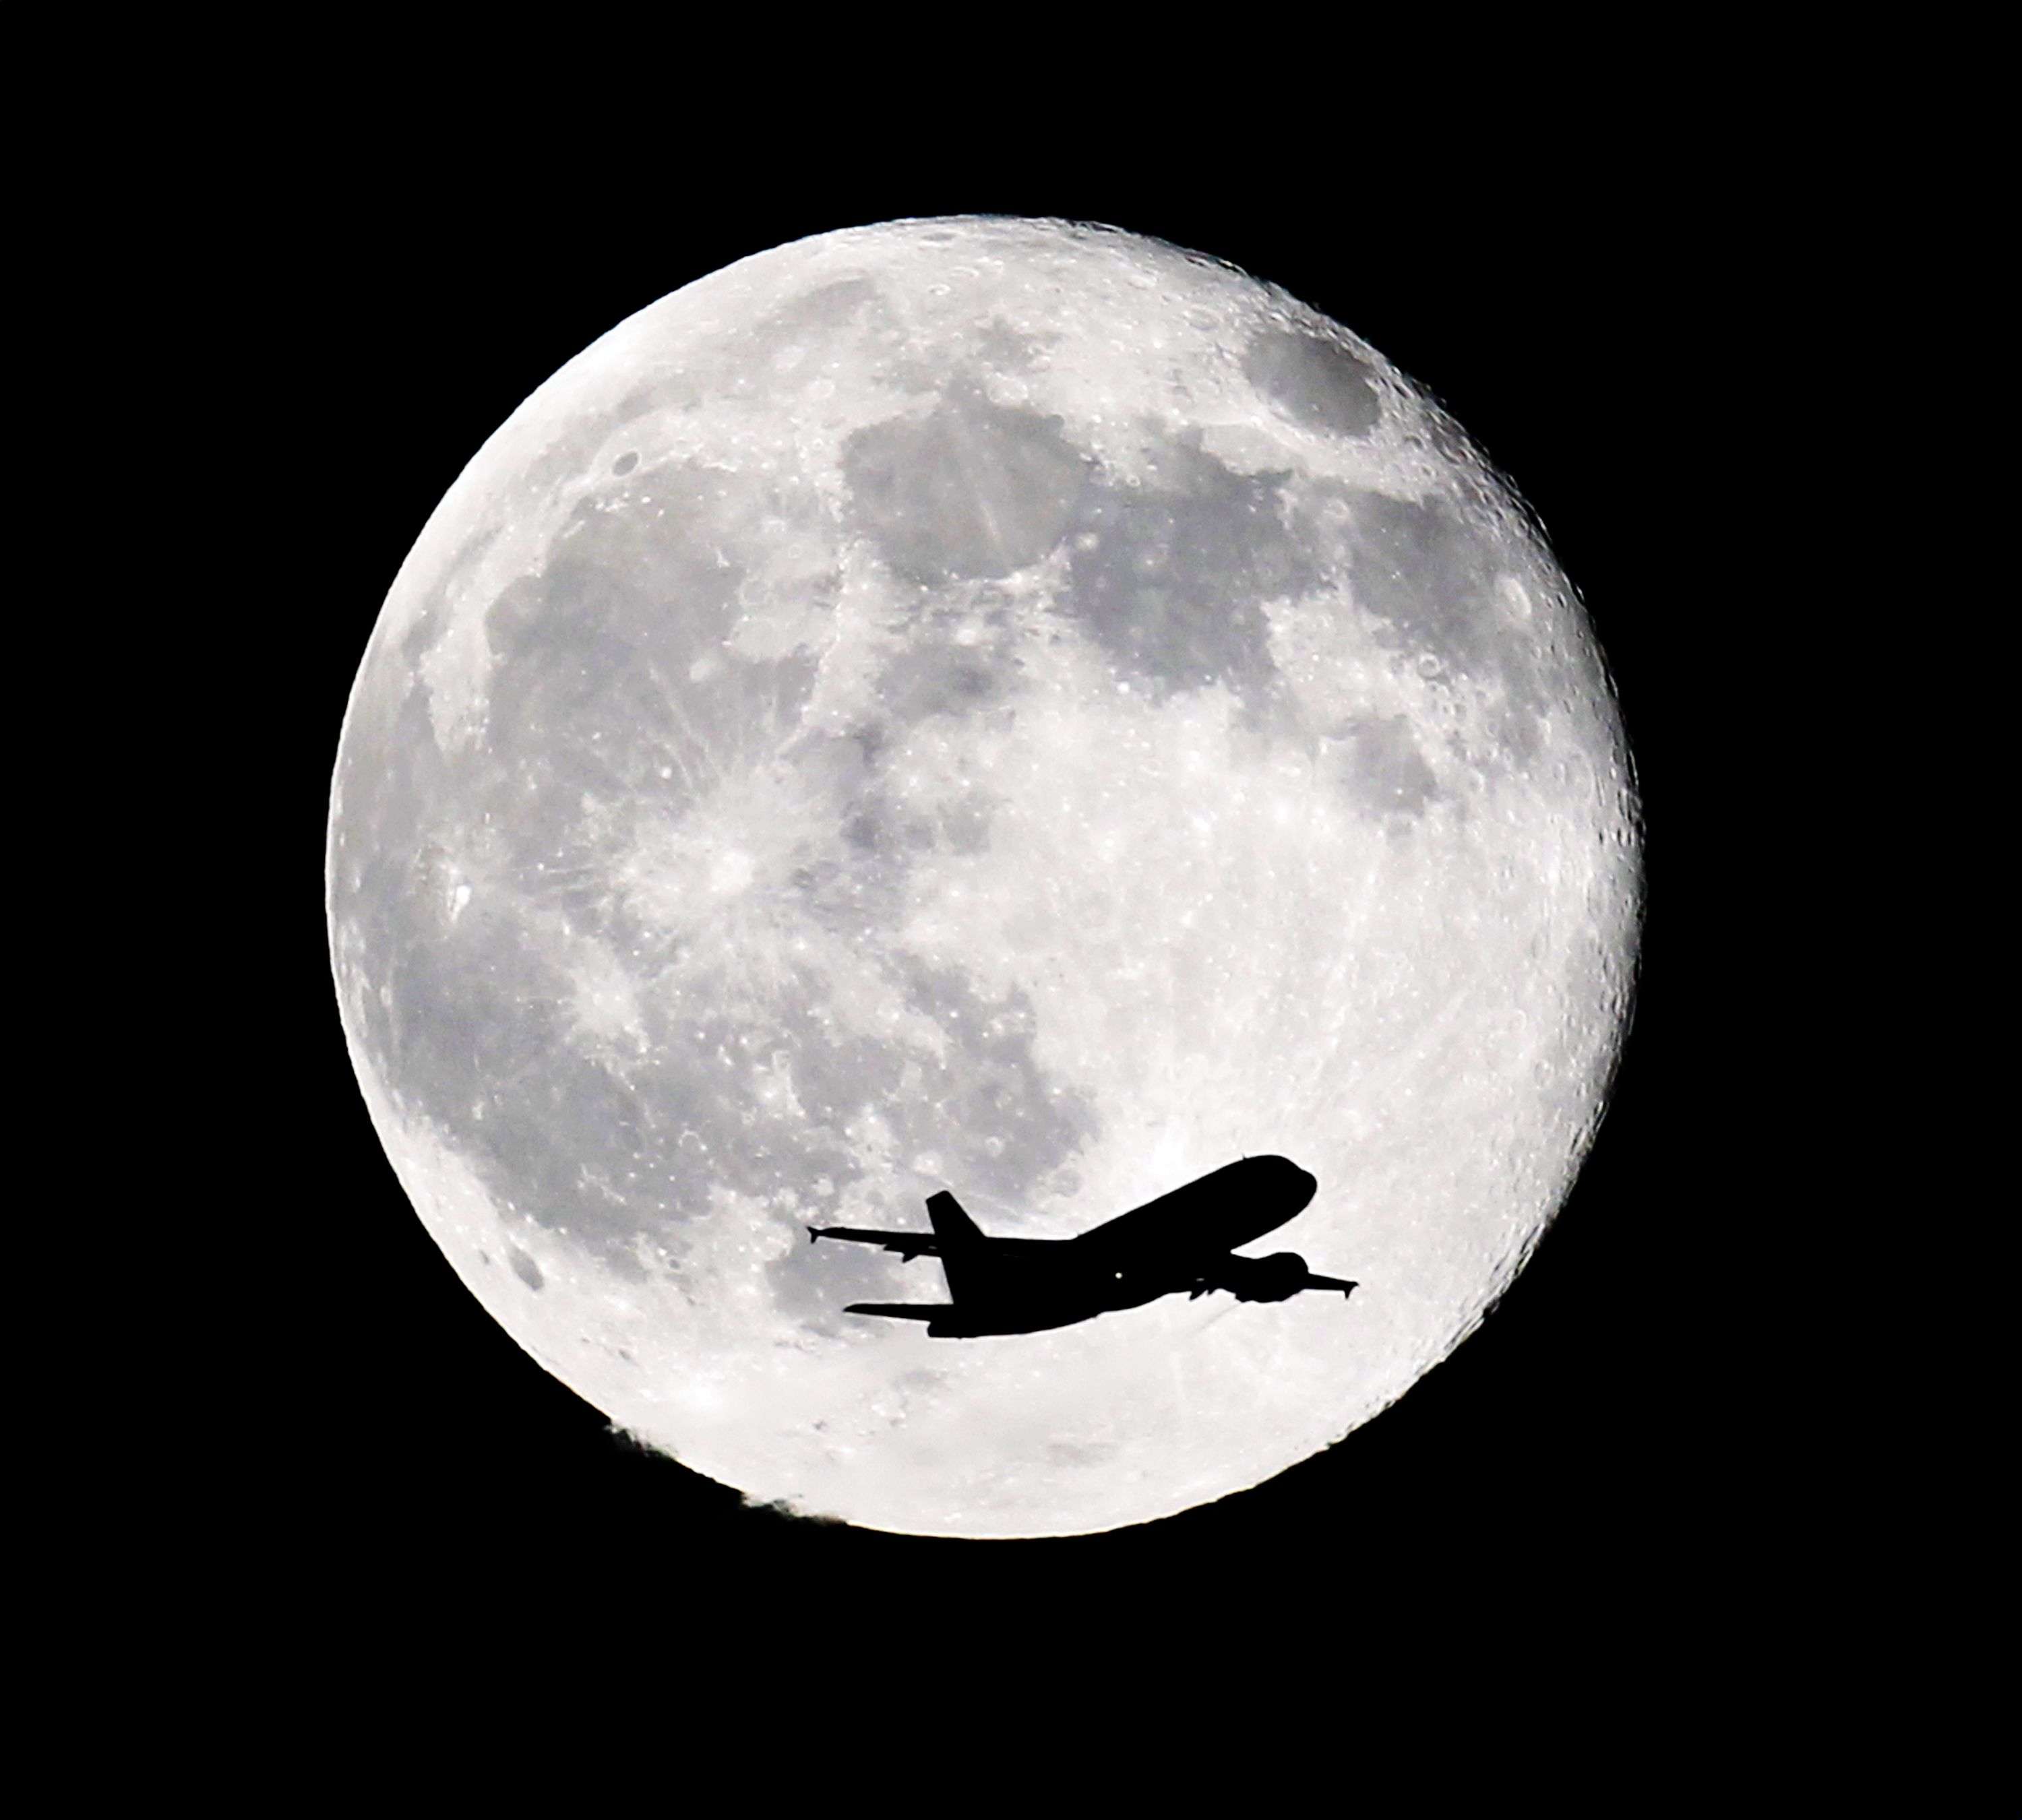 An American Airlines passenger airplane from Miami crosses a blue moon over Whittier, Calif., as it heads to Los Angeles Airport, Friday, July 31, 2015. (AP Photo/Nick Ut)